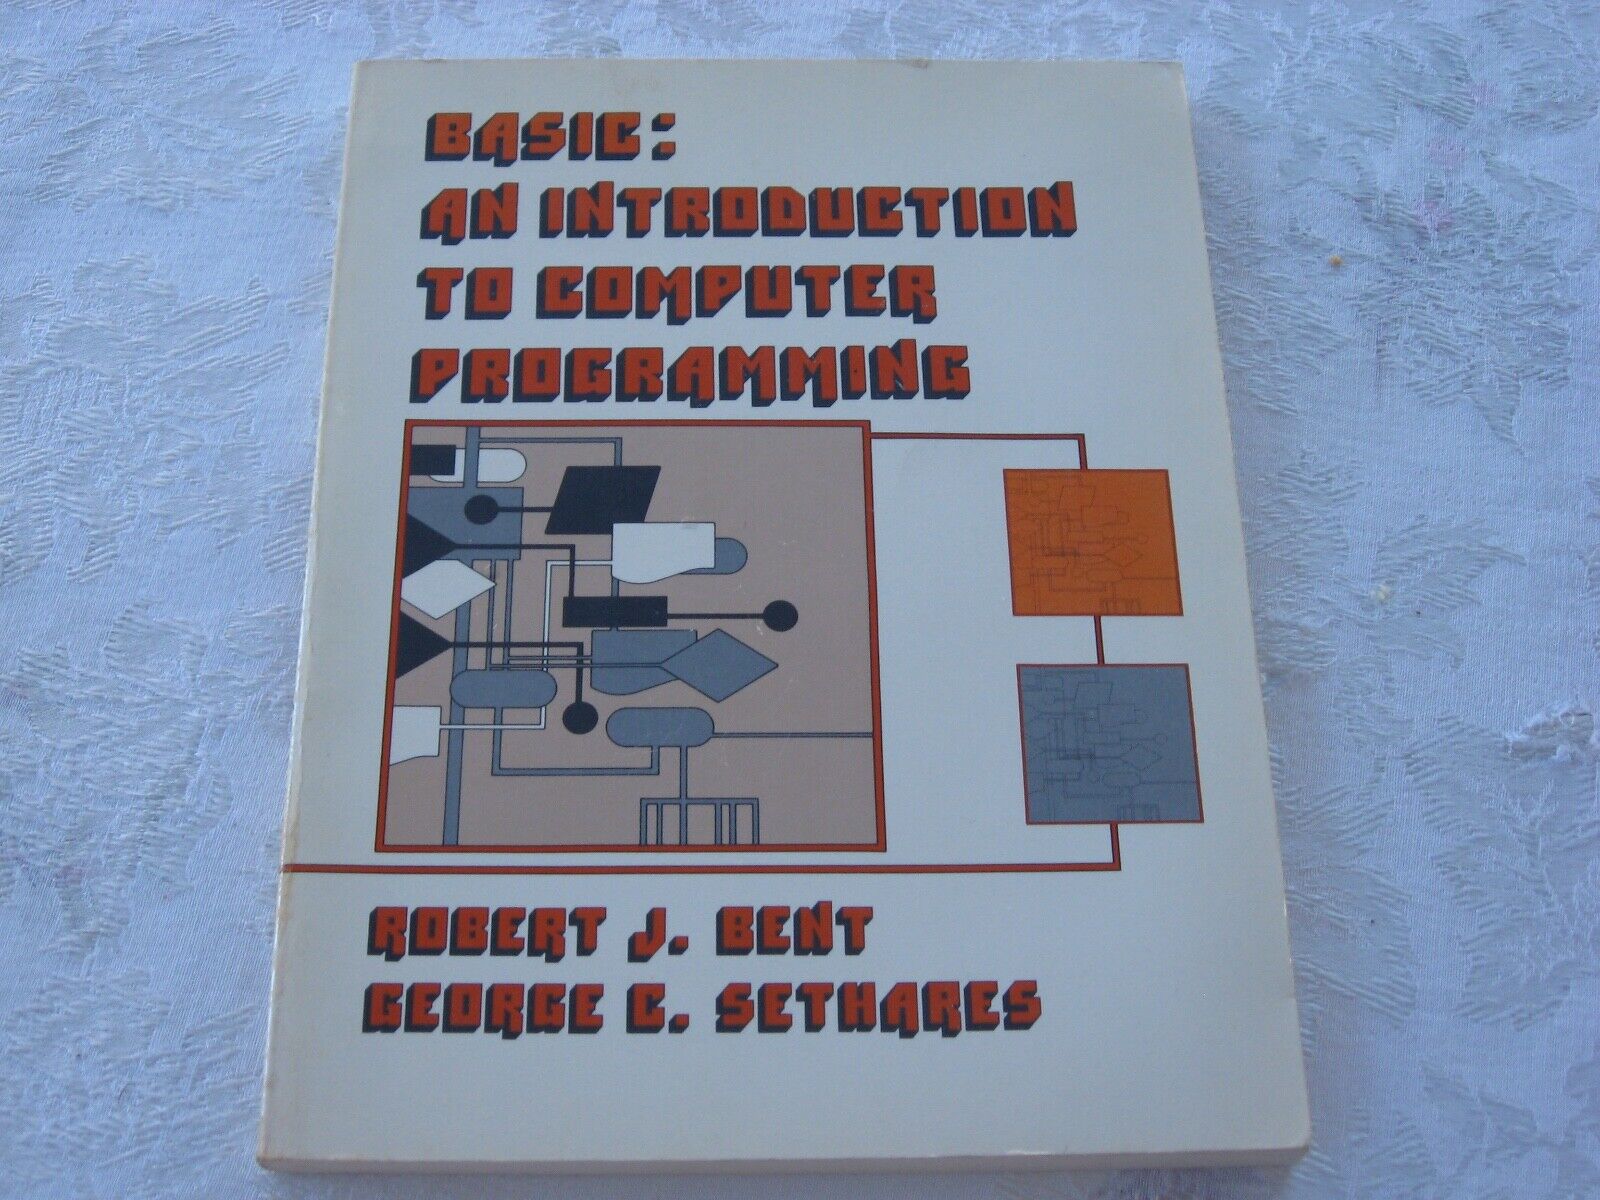 Vintage 1978 Basic: An Introduction To Computer Programming R.Bent/Sethares Rare